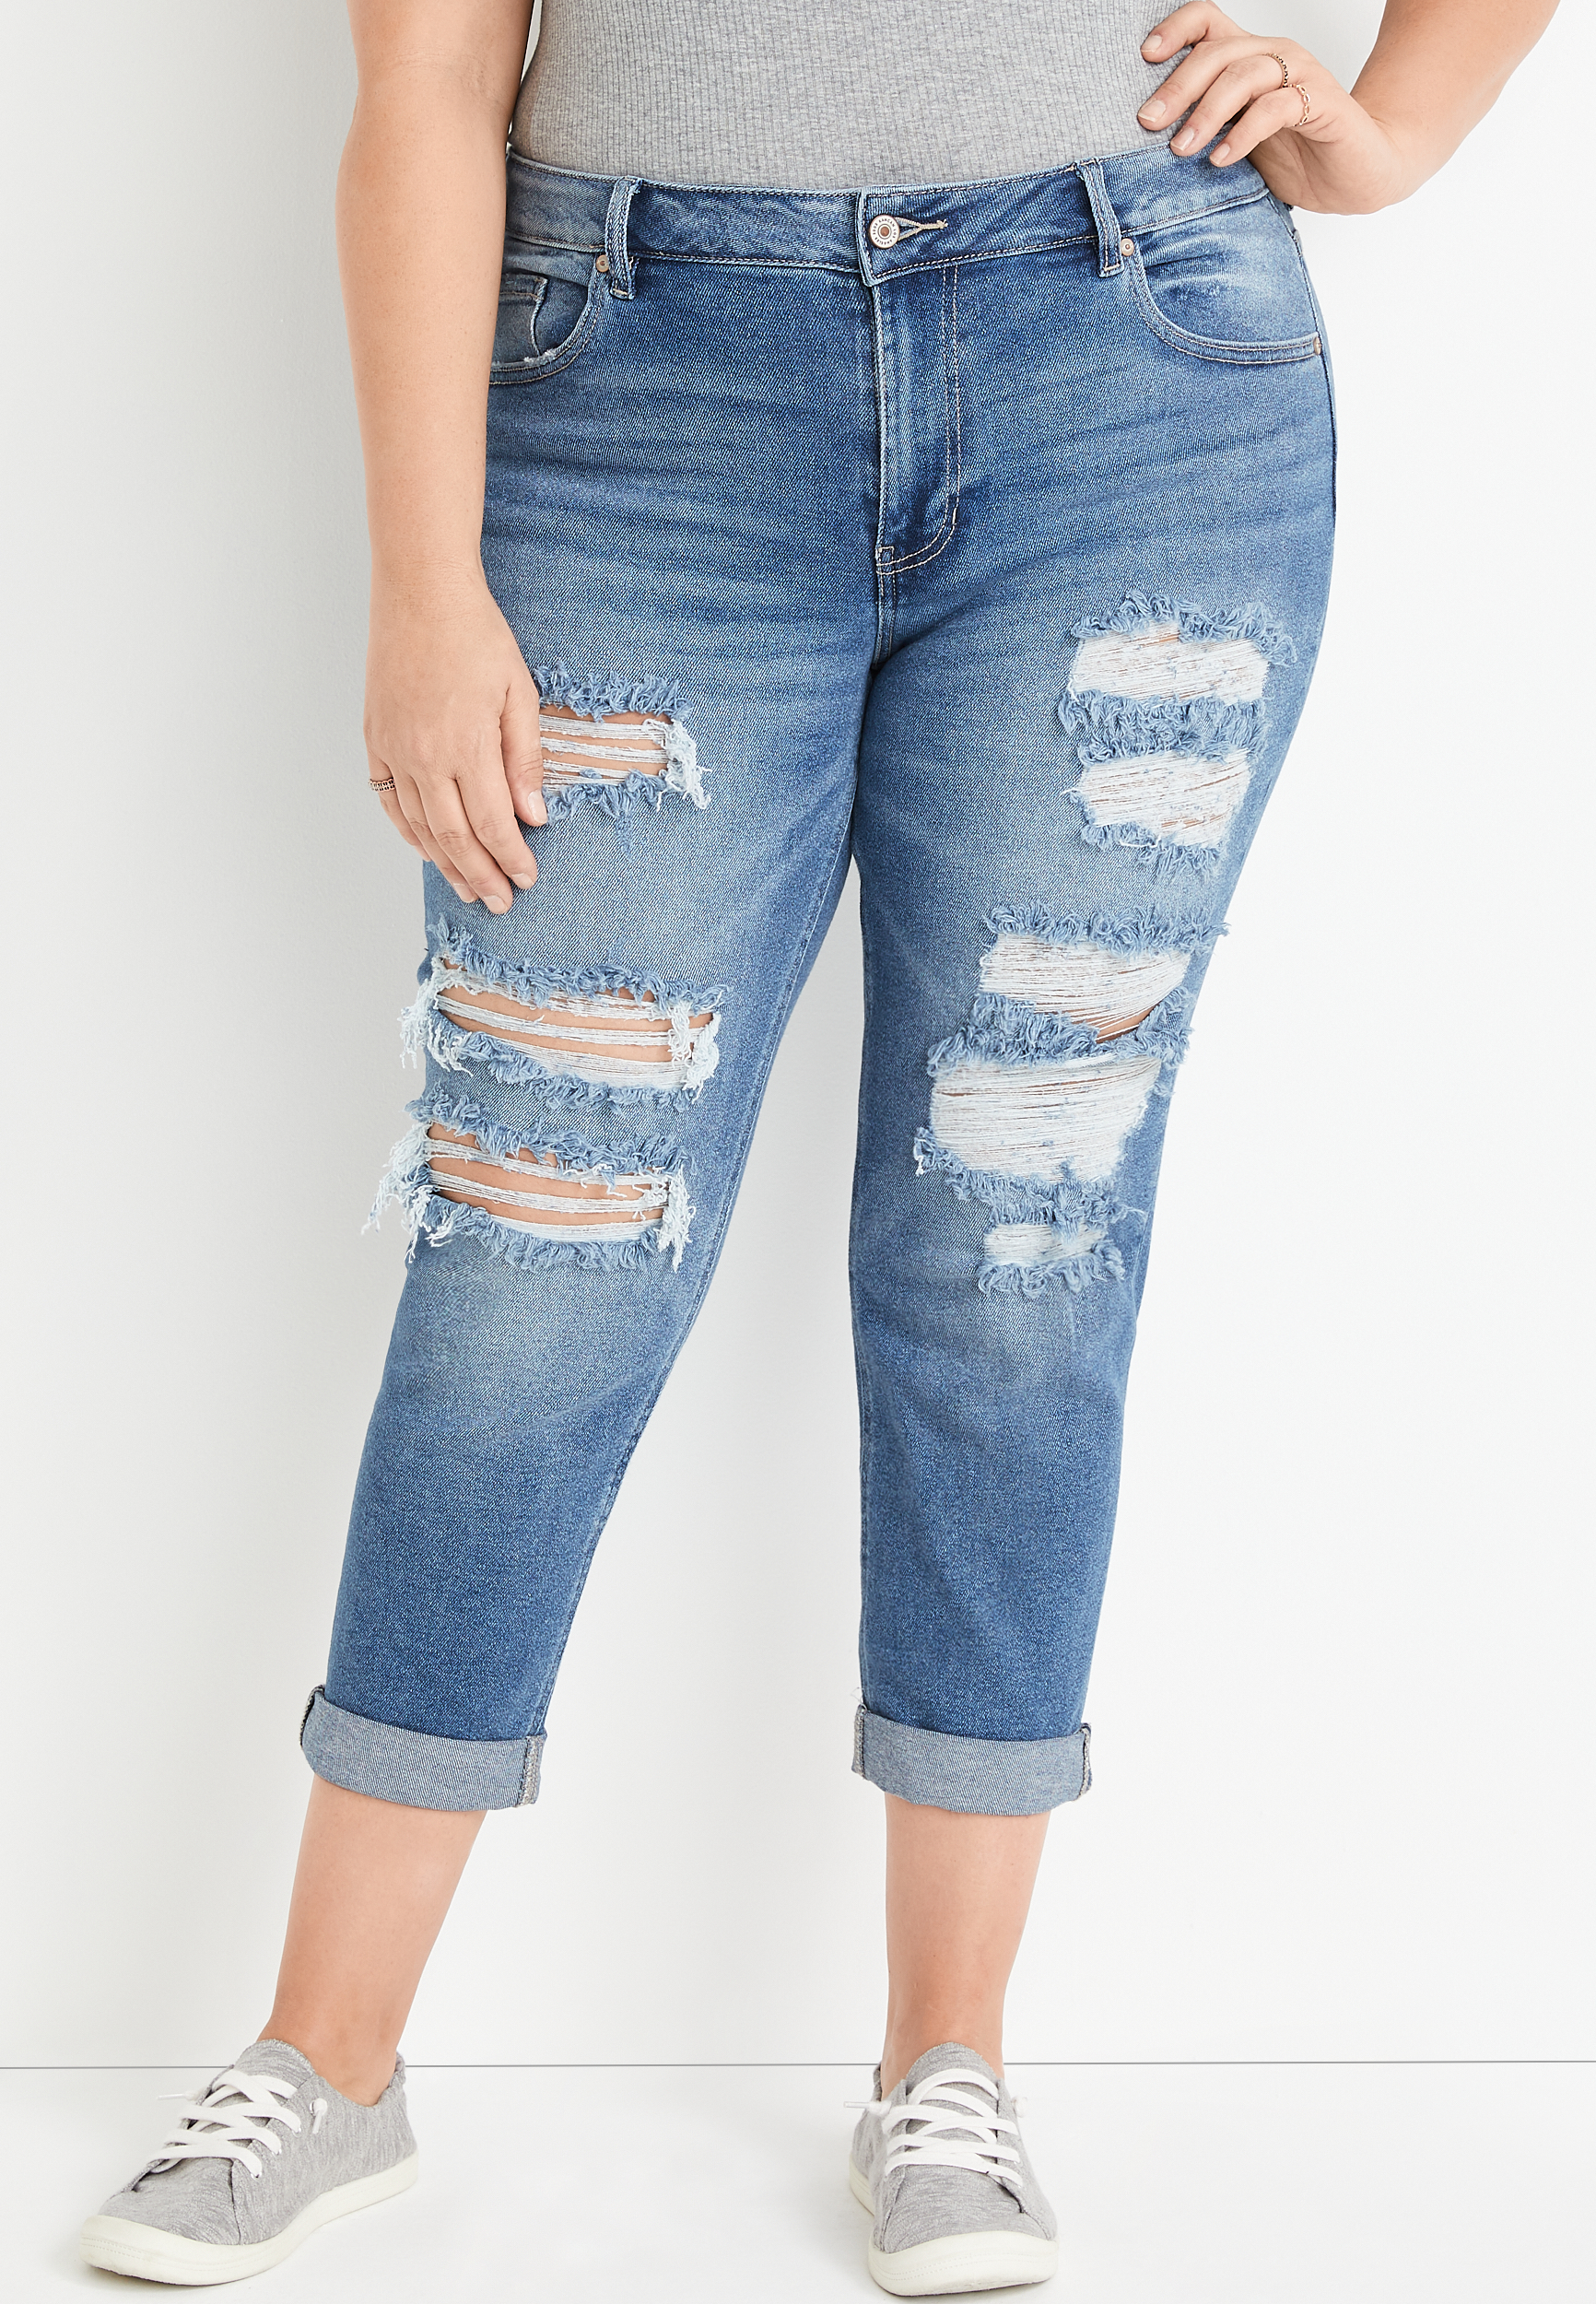 Plus Size KanCan™ High Rise Ripped Cropped Jean | maurices